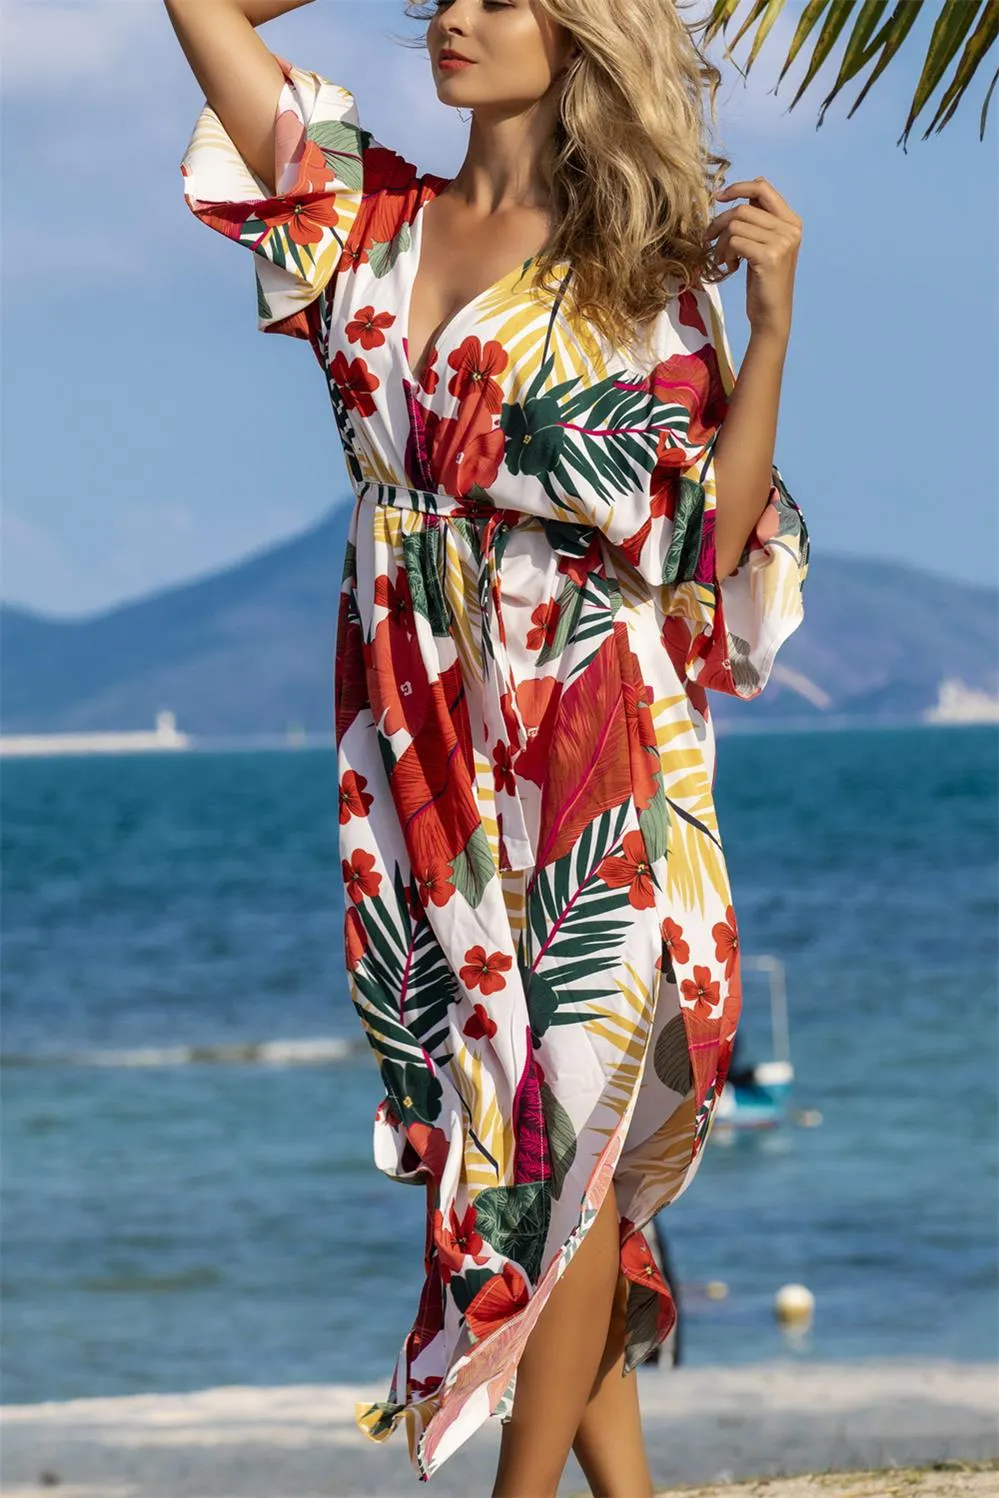 YouKD Summer Cotton Embroidered Floral Loose Caftan Boho Beach Bikini Cover Up Dress Plus Size Robe for Women